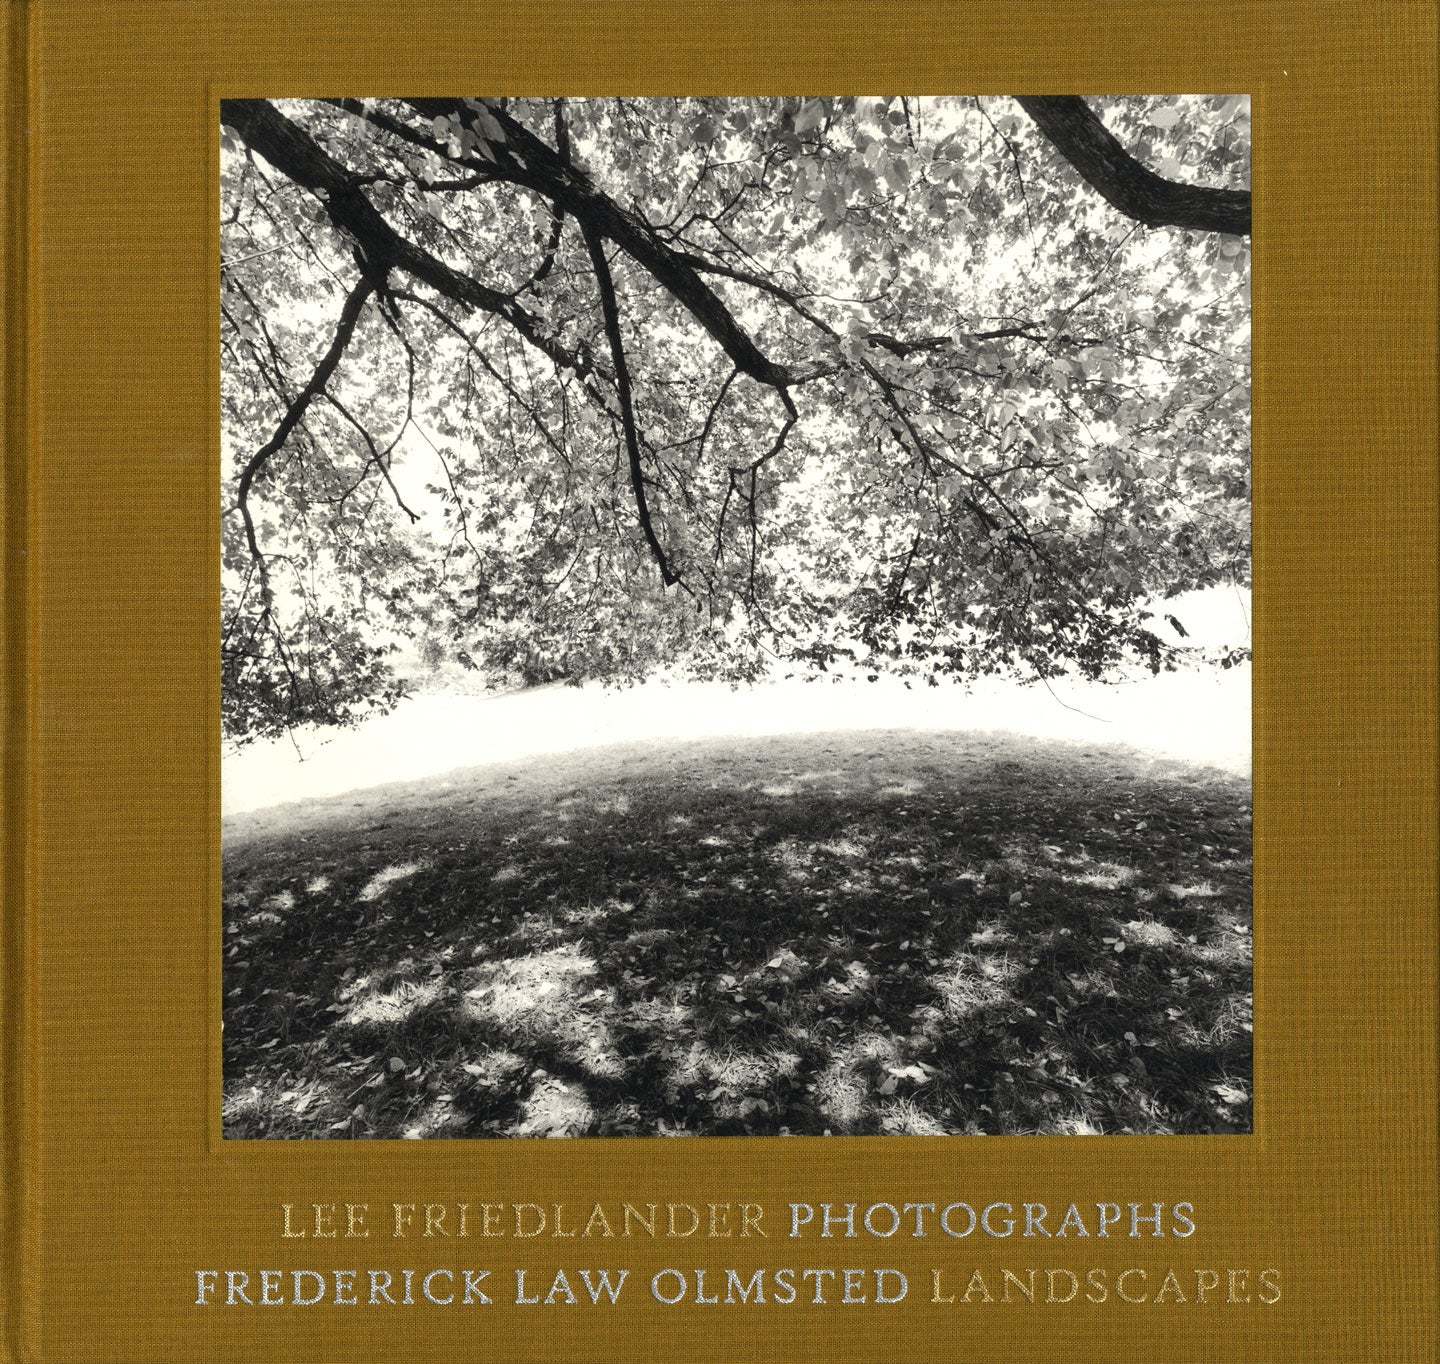 Lee Friedlander: A Complete Collection of 84 Books and Catalogues [All Titles SIGNED, First Edition, First Printing, in Fine or As New Condition; Some Titles Limited Editions; Includes Additional Ephemera]